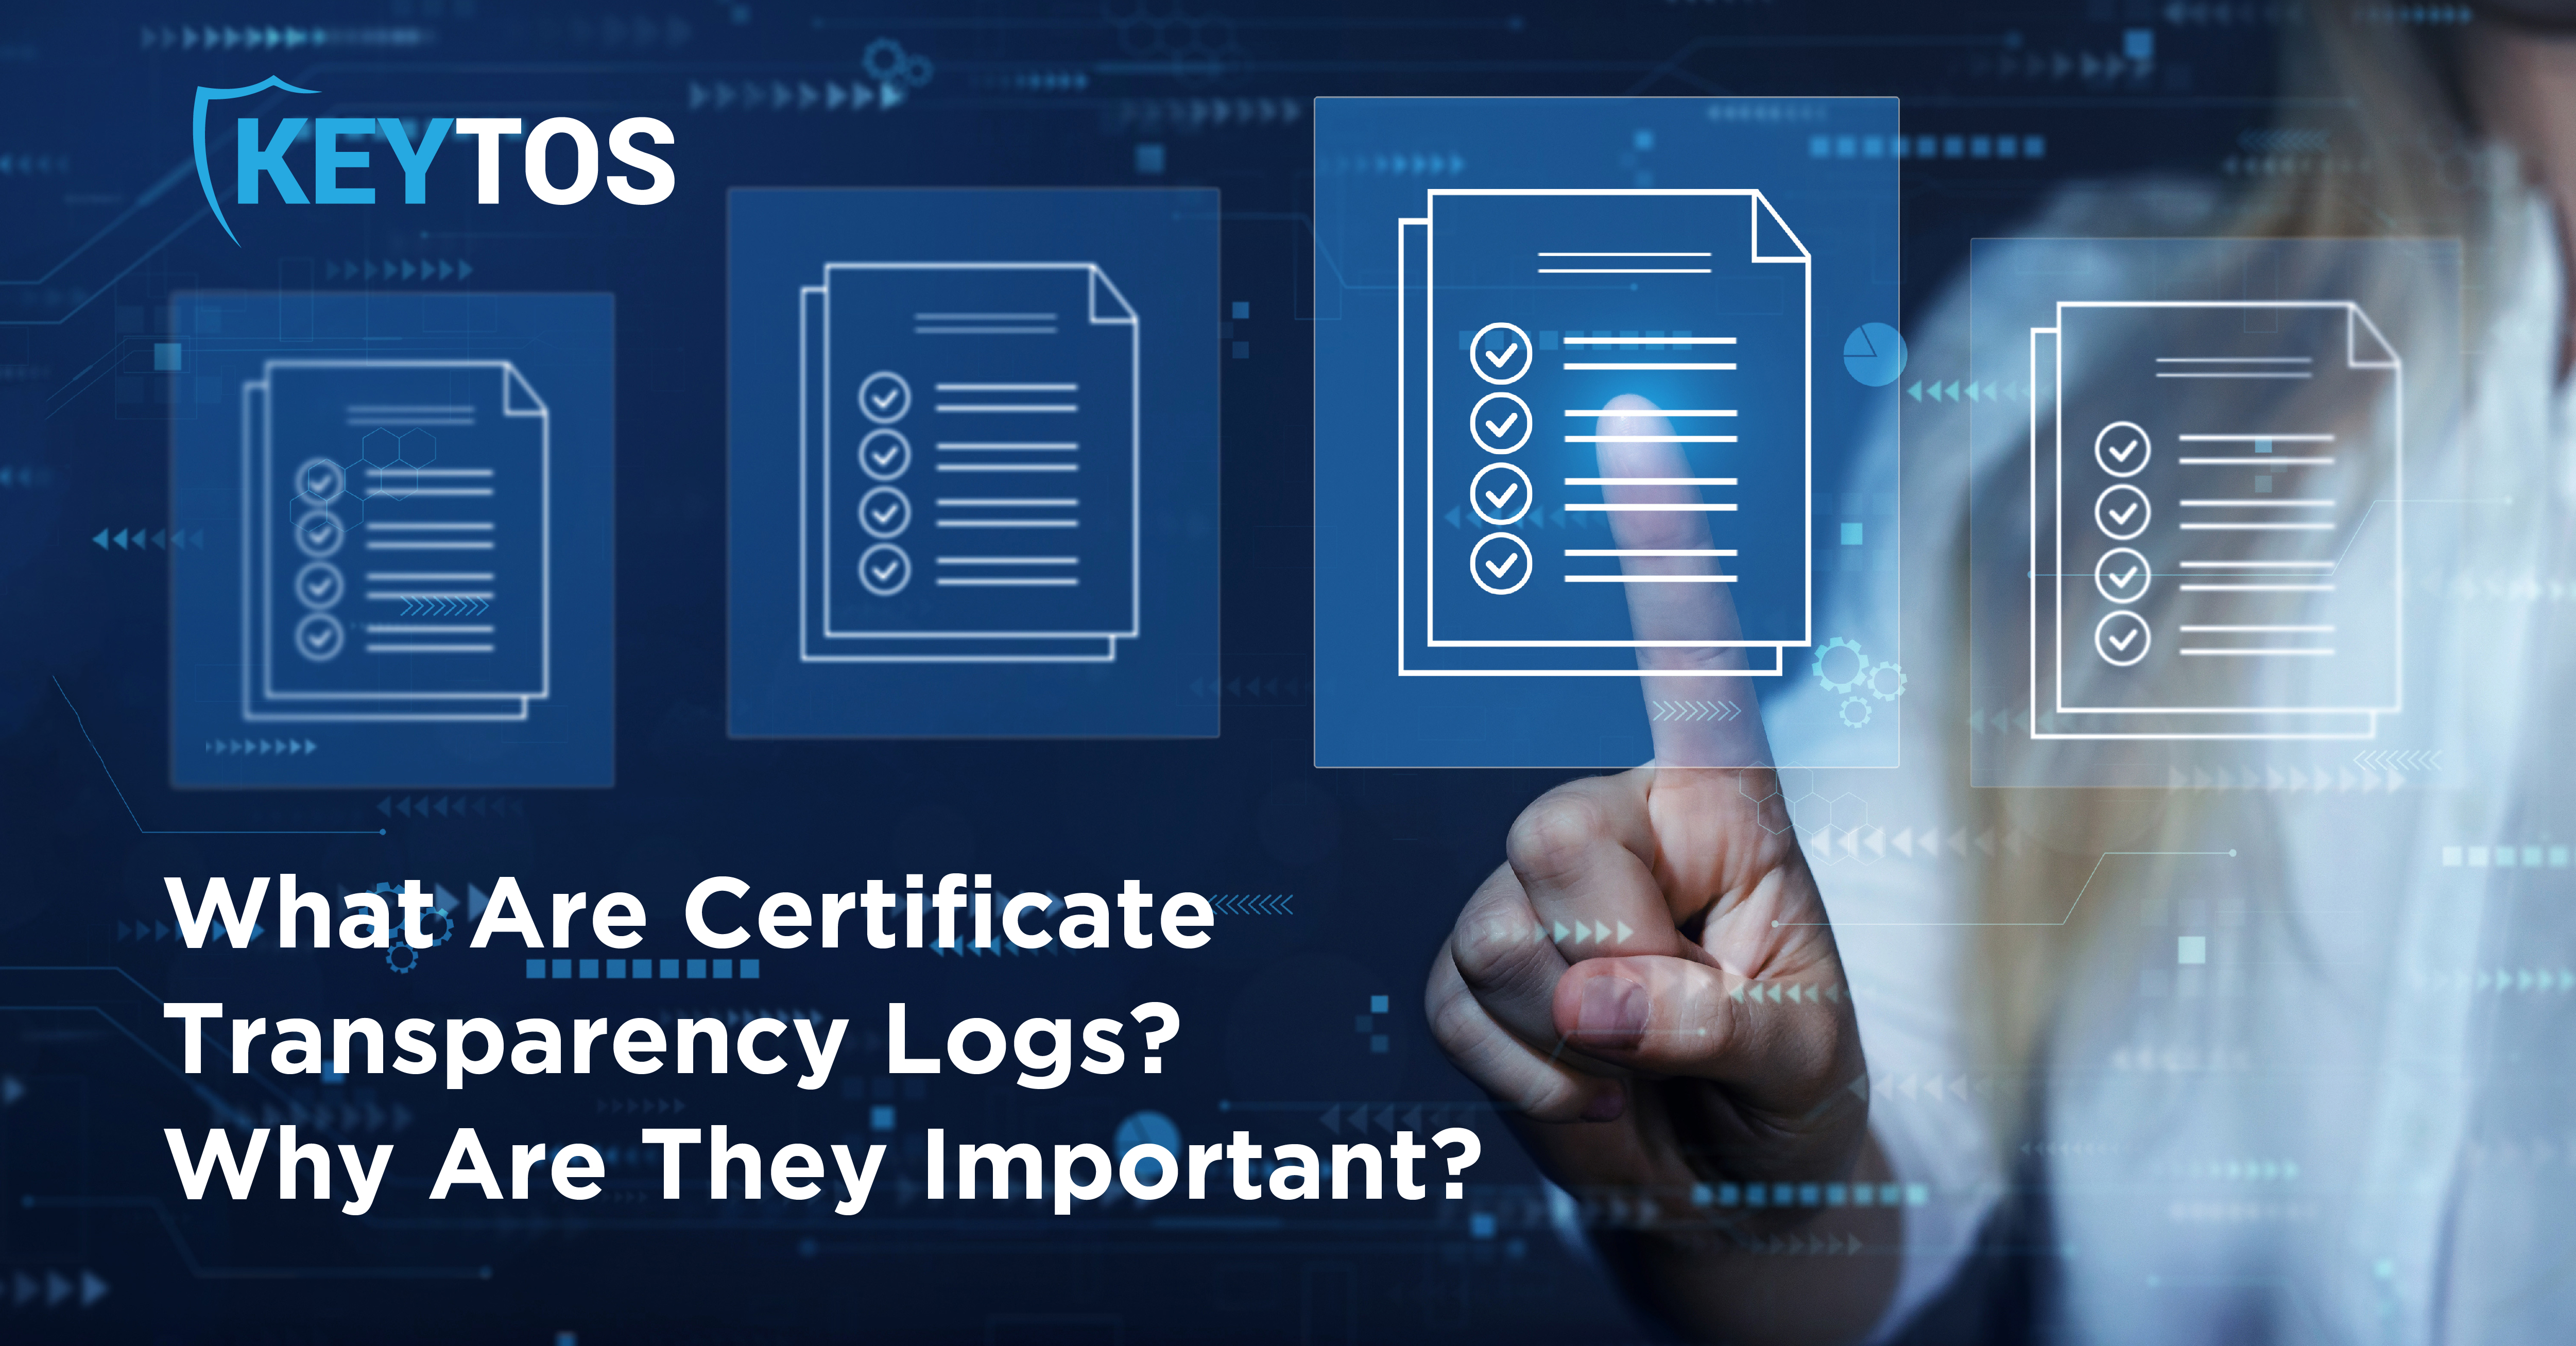 What Are Certificate Transparency Logs? Why Are CT Logs Important?